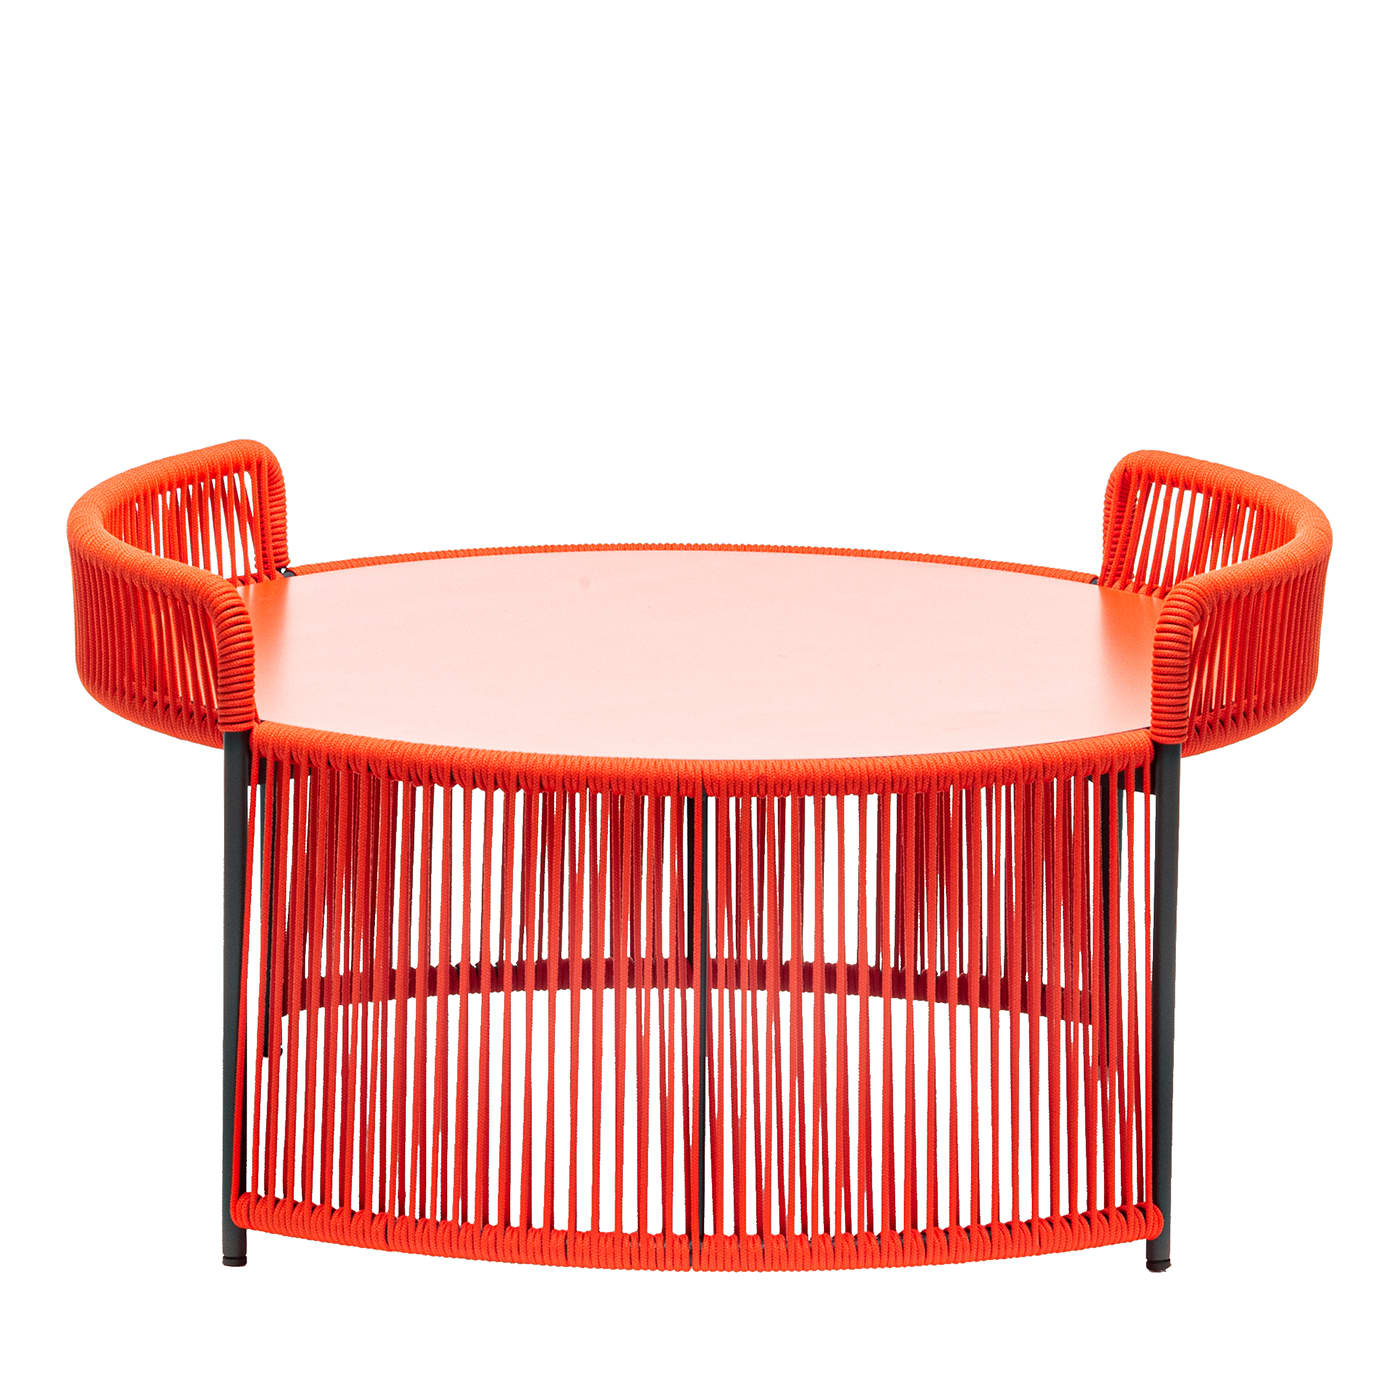 Altana Medium Round Red Coffee Table by Antonio De Marco - Chairs & More